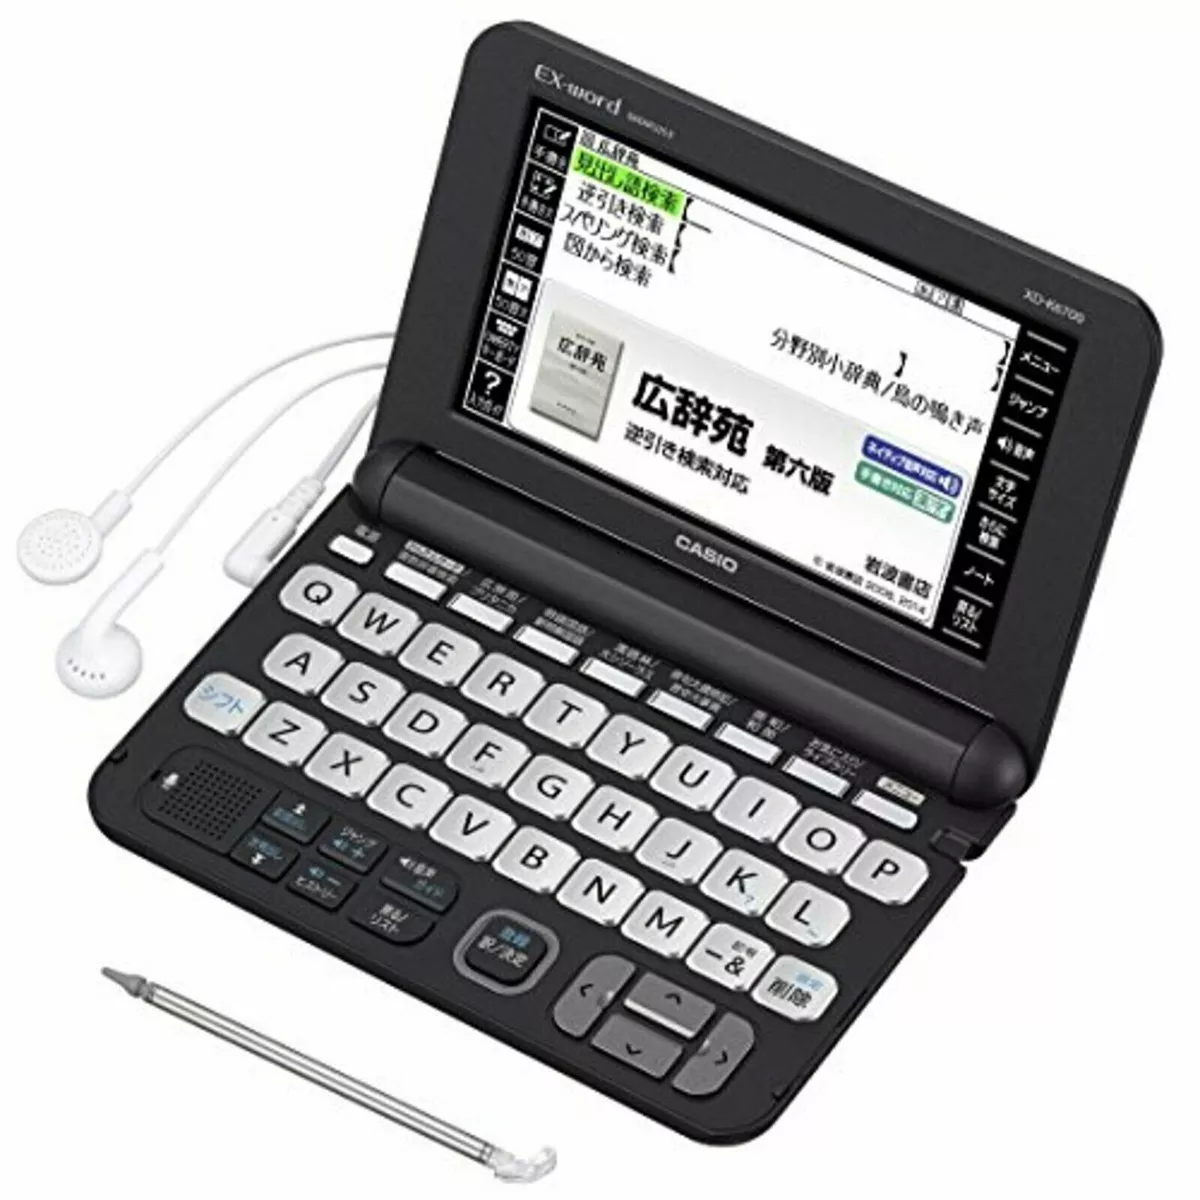 Casio Electronic Dictionary EX-word XD-K6700BK Black F/S w/Tracking# Japan  New